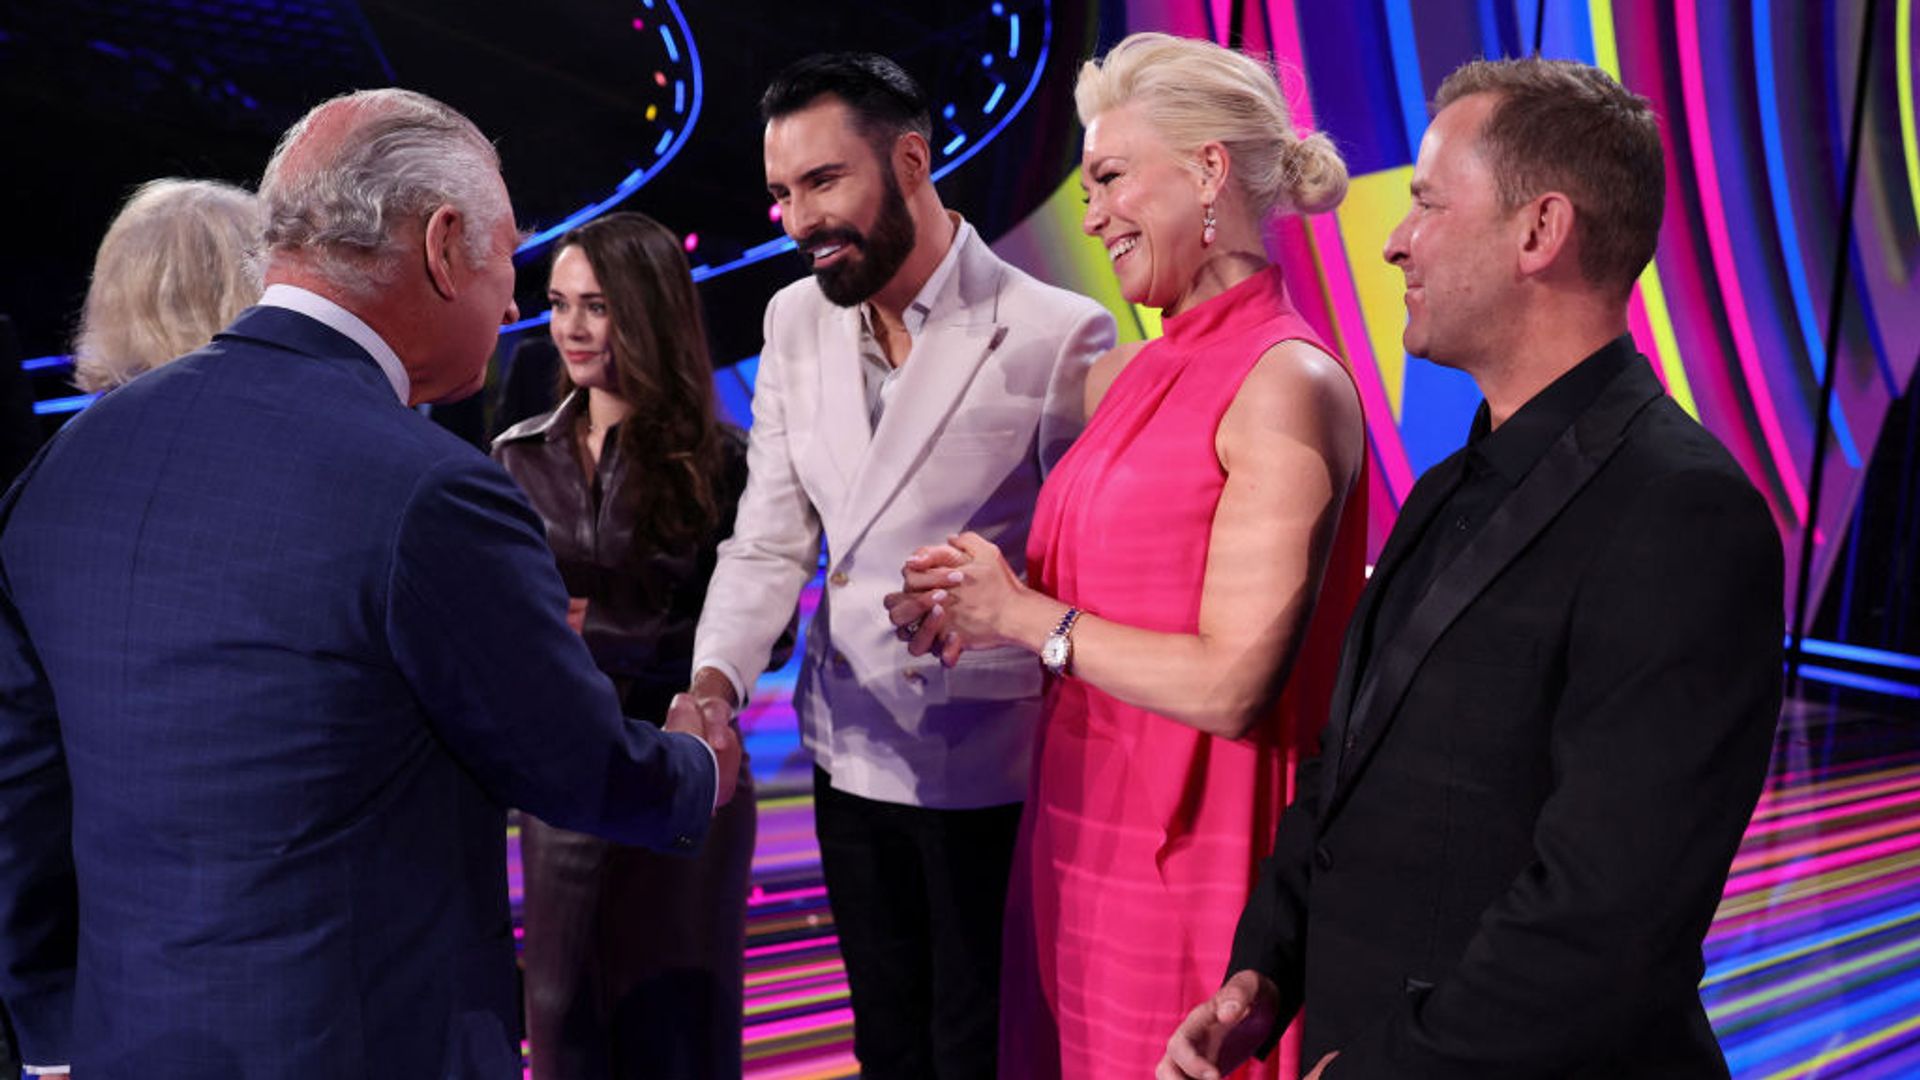 Rylan Clark shakes King Charles' hand during a meeting on stage at the Eurovision 2023 arena in Liverpool